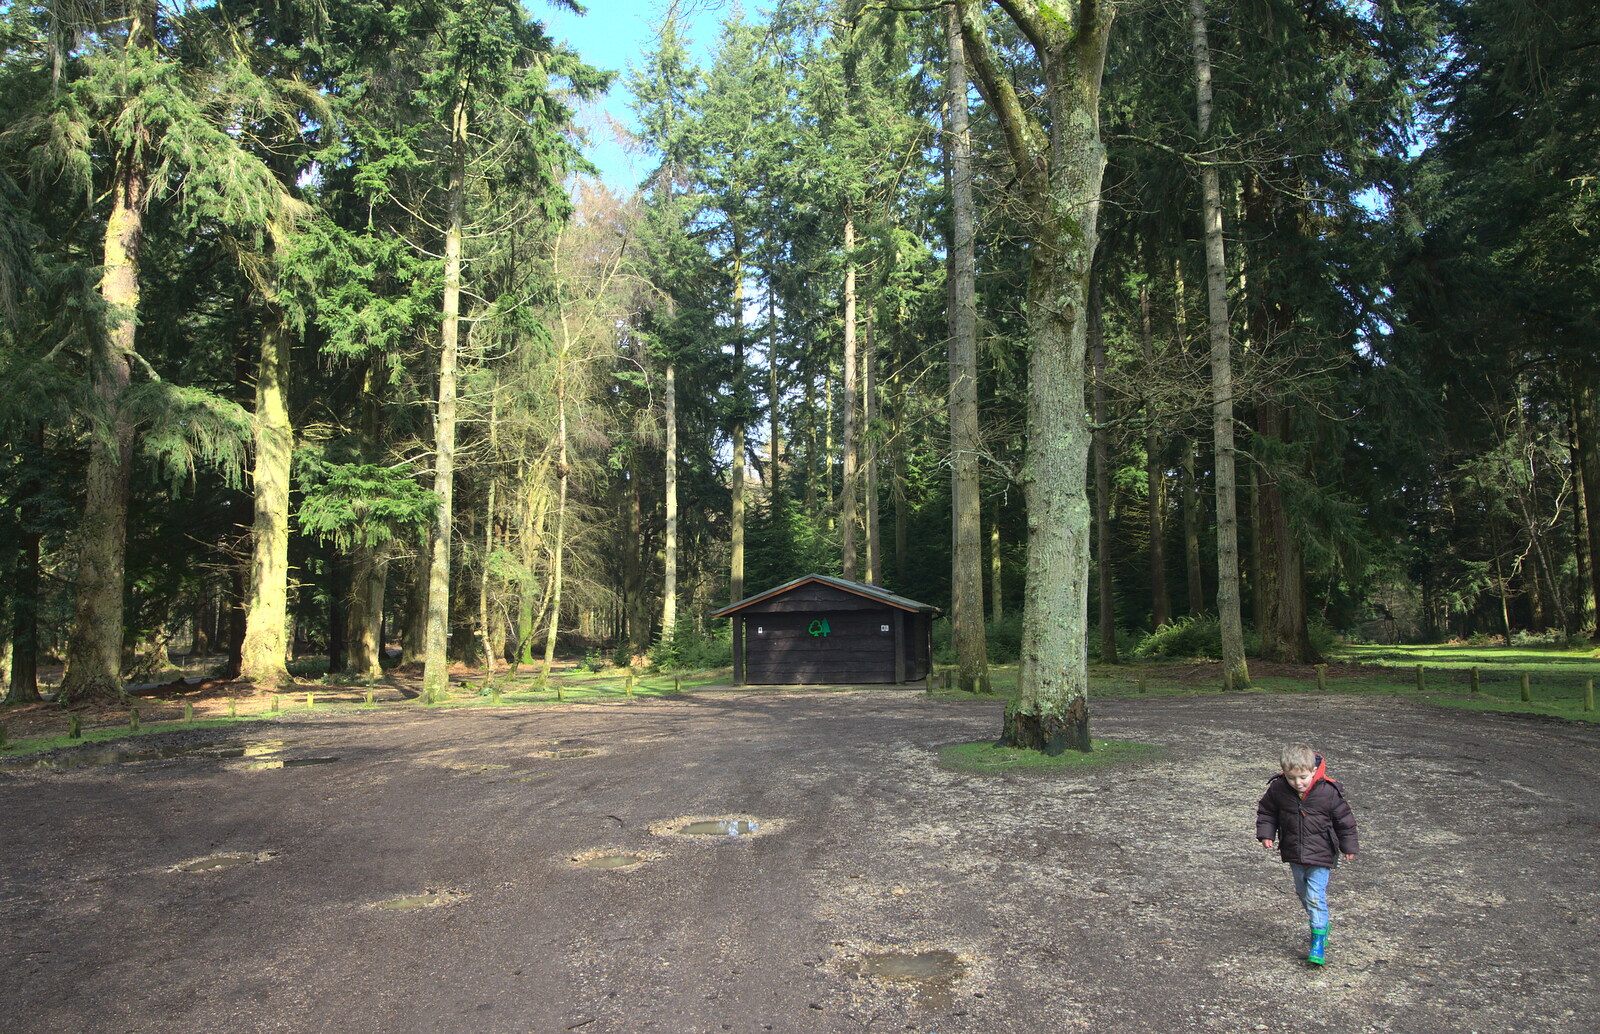 A Forestry Commission hut from The Ornamental Drive, Rhinefield, New Forest - 20th March 2013